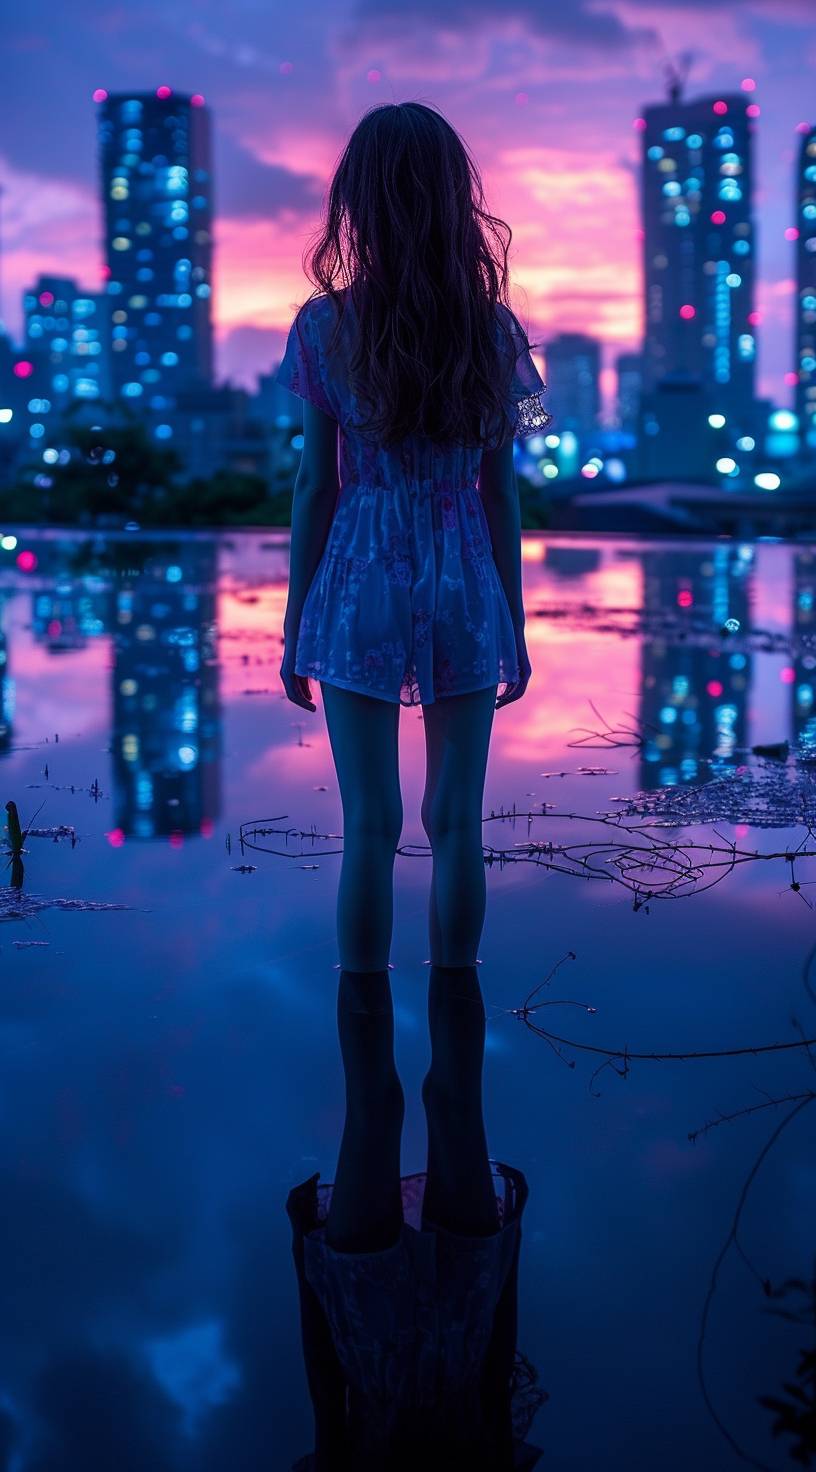 Contrast with huge height difference, amazing, composition, many reflections, anime style, key visual, sky, unexplored region, exploration, bright style, blurred background